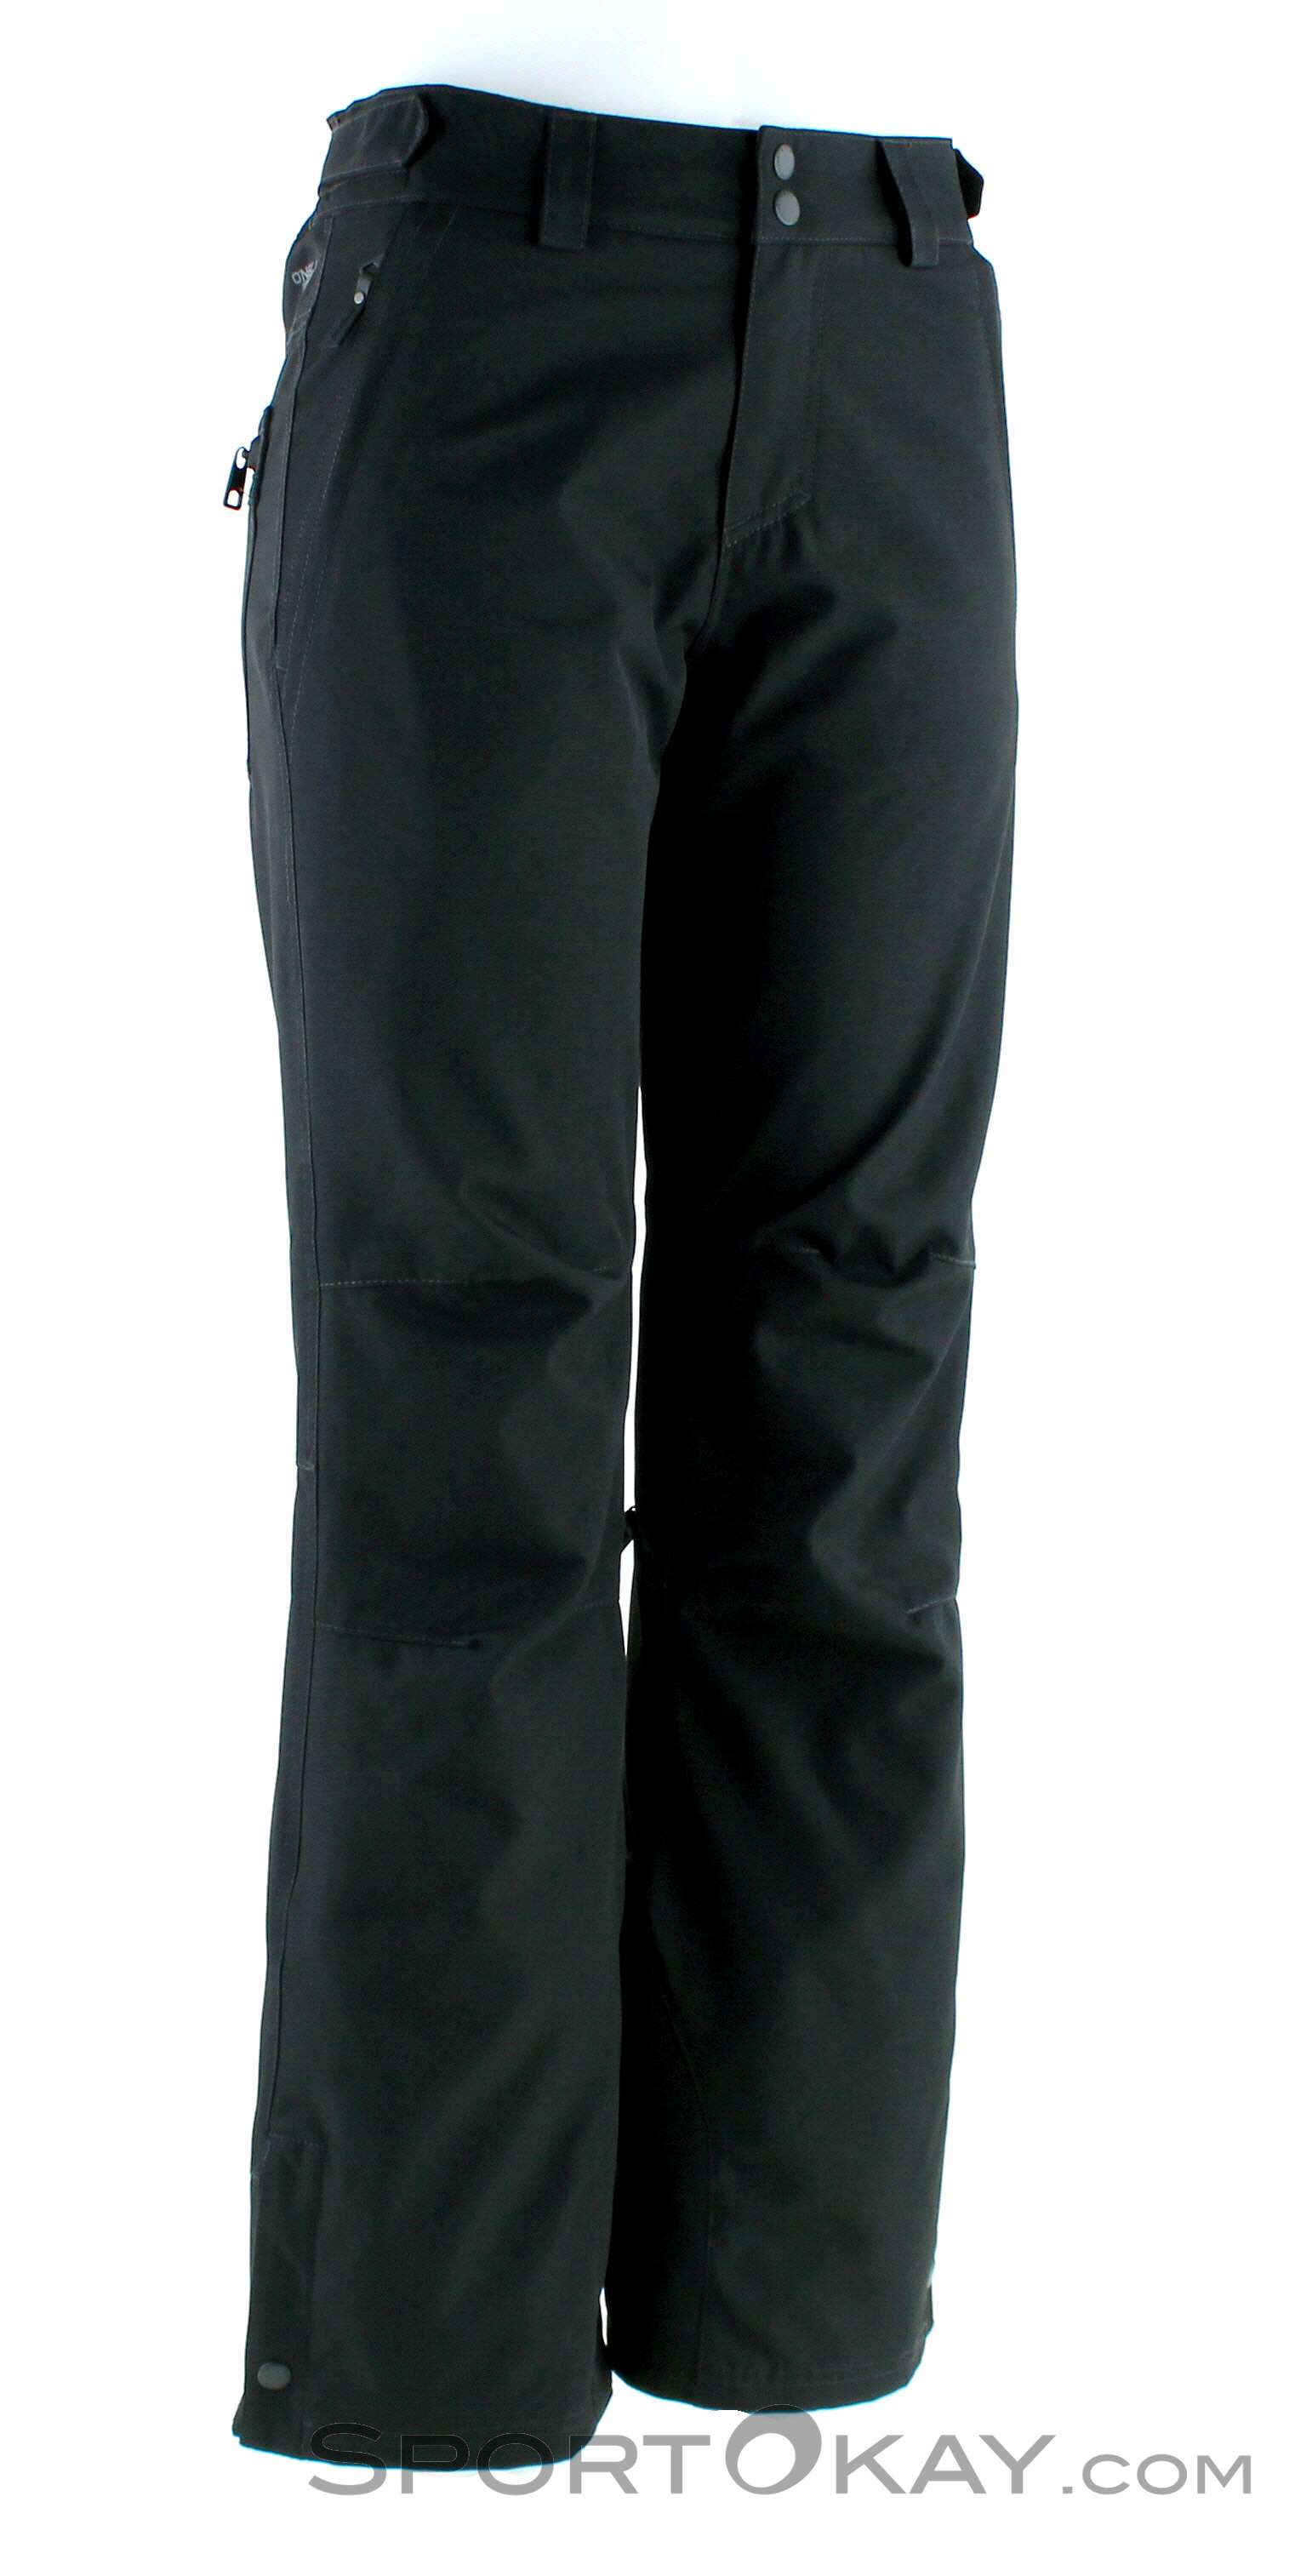 ONeill Pw Glamour Womens Ski Trousers